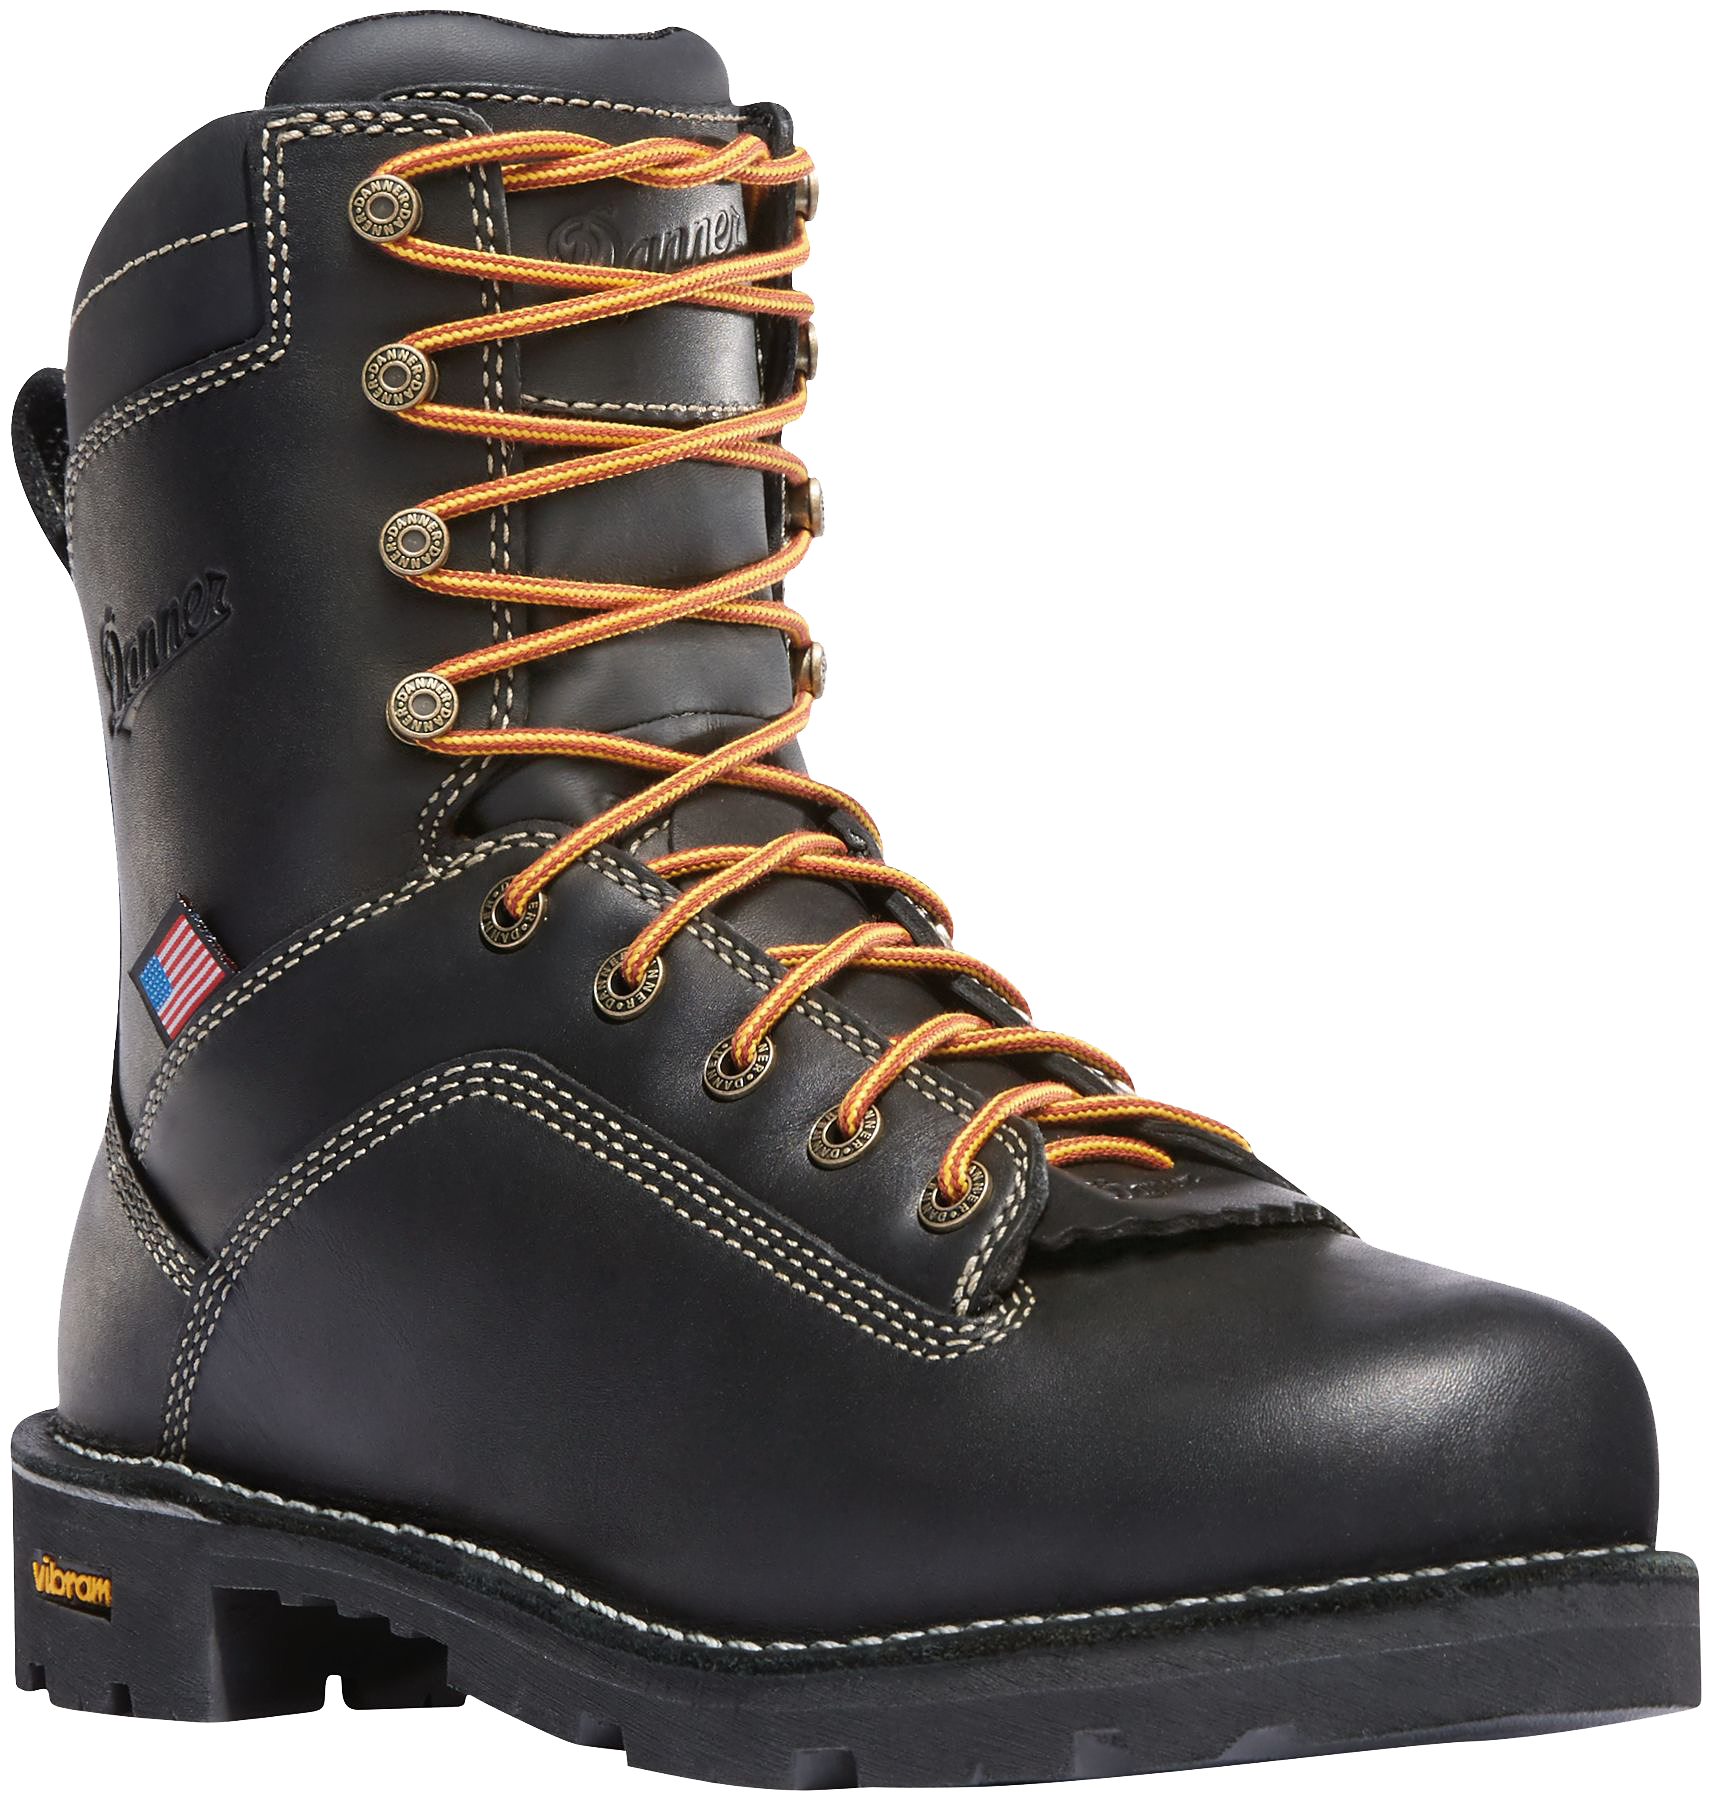 Danner Quarry USA Brown GORE-TEX Alloy Toe Work Boots for Men - Black - 8.5W